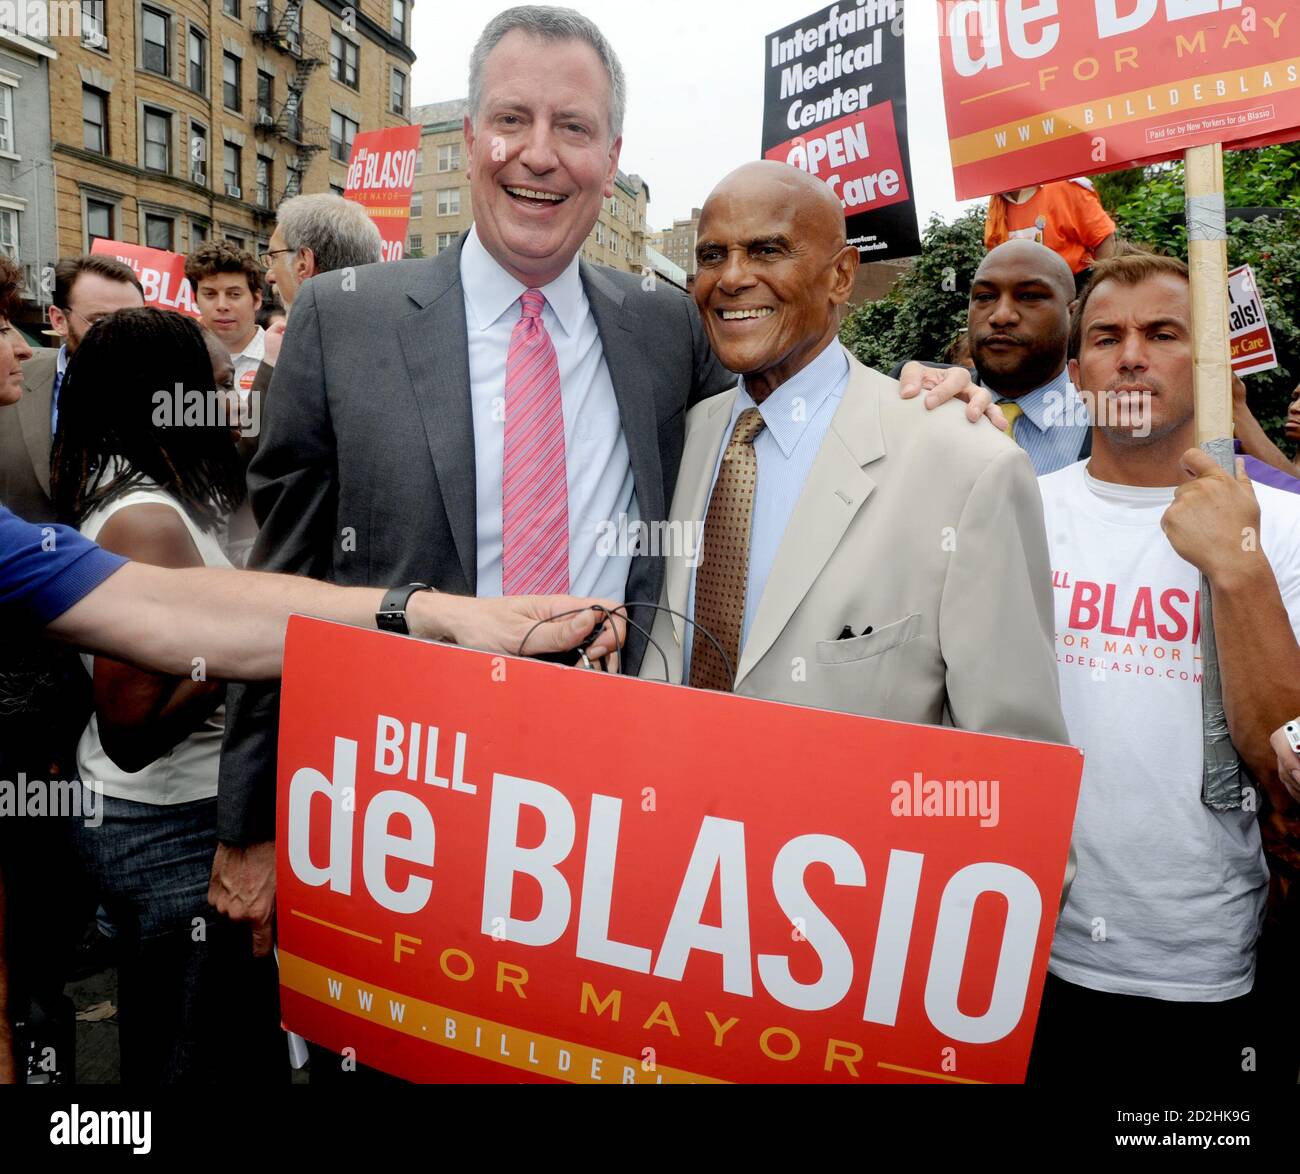 SMG Bill de Blasio Harry Belafonte NY1 Mayor 081913 01.JPG NEW YORK, NY - AUGUST 19: Democratic candidate for Mayor and Public Advocate Bill de Blasio speaks as actor, singer and supporter Harry Belafonte and actress Susan Sarandon look on at a 'Hospitals Not Condos' rally in the West Village on August 19, 2013 in New York City. De Blasio called for quality health care for all New Yorkers and for the end of shuttering city hospitals.  (Photo By Storms Media Group)   People:  Bill de Blasio Harry Belafonte  Transmission Ref:  NY1  Must call if interested Michael Storms Storms Media Group Inc. 3 Stock Photo